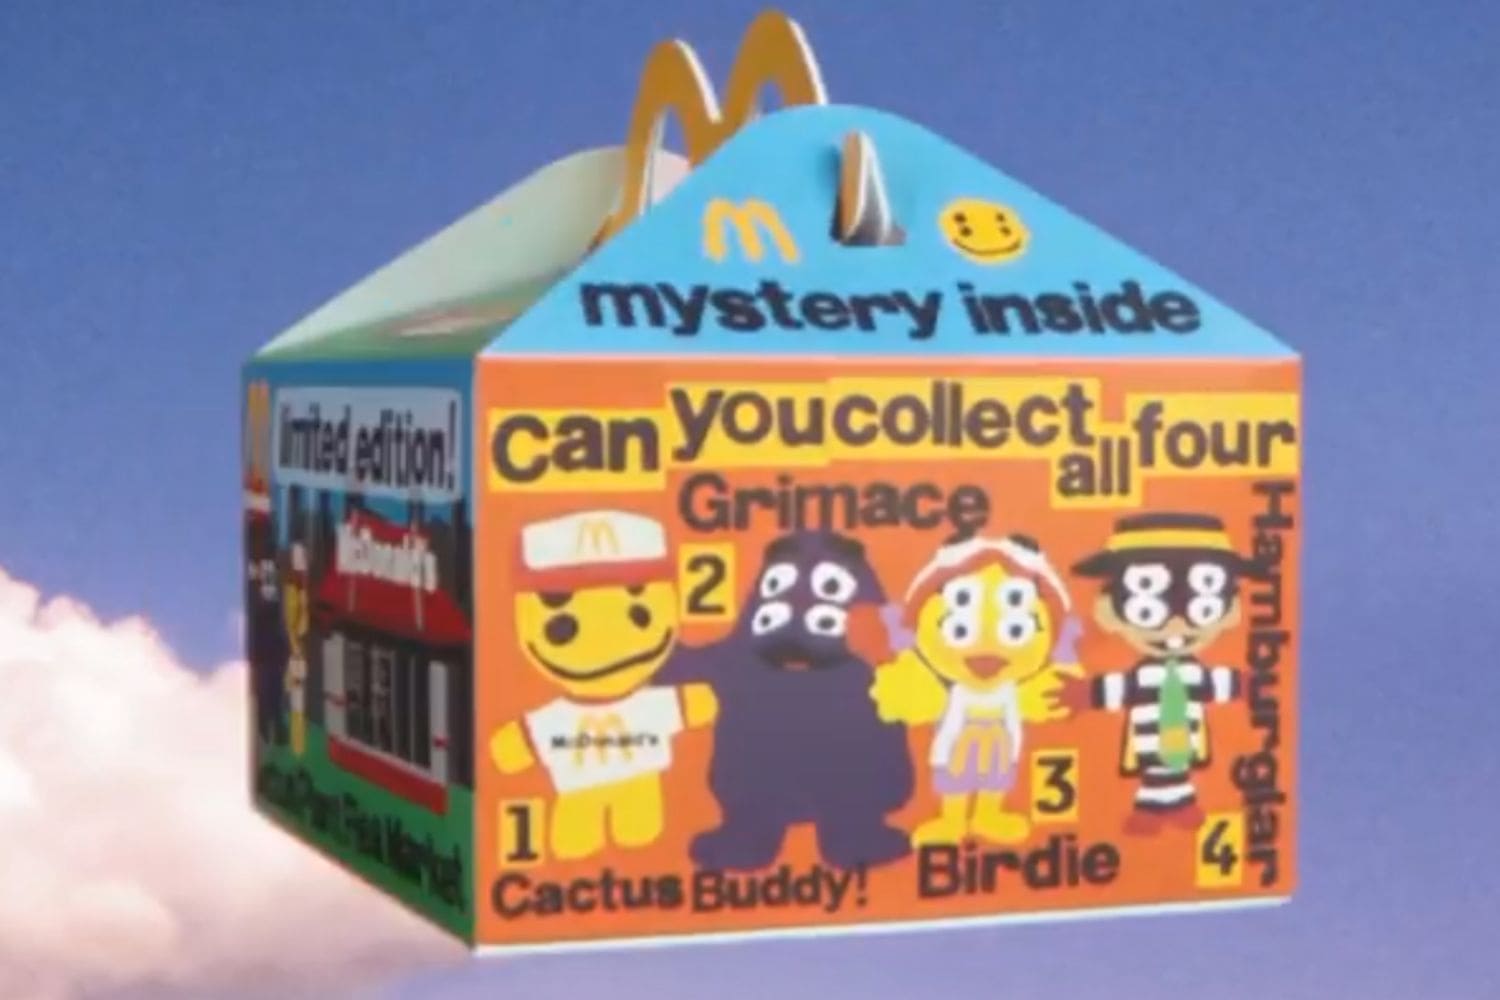 McDonald's Happy Meal for adults, Cactus Plant toys sold out at